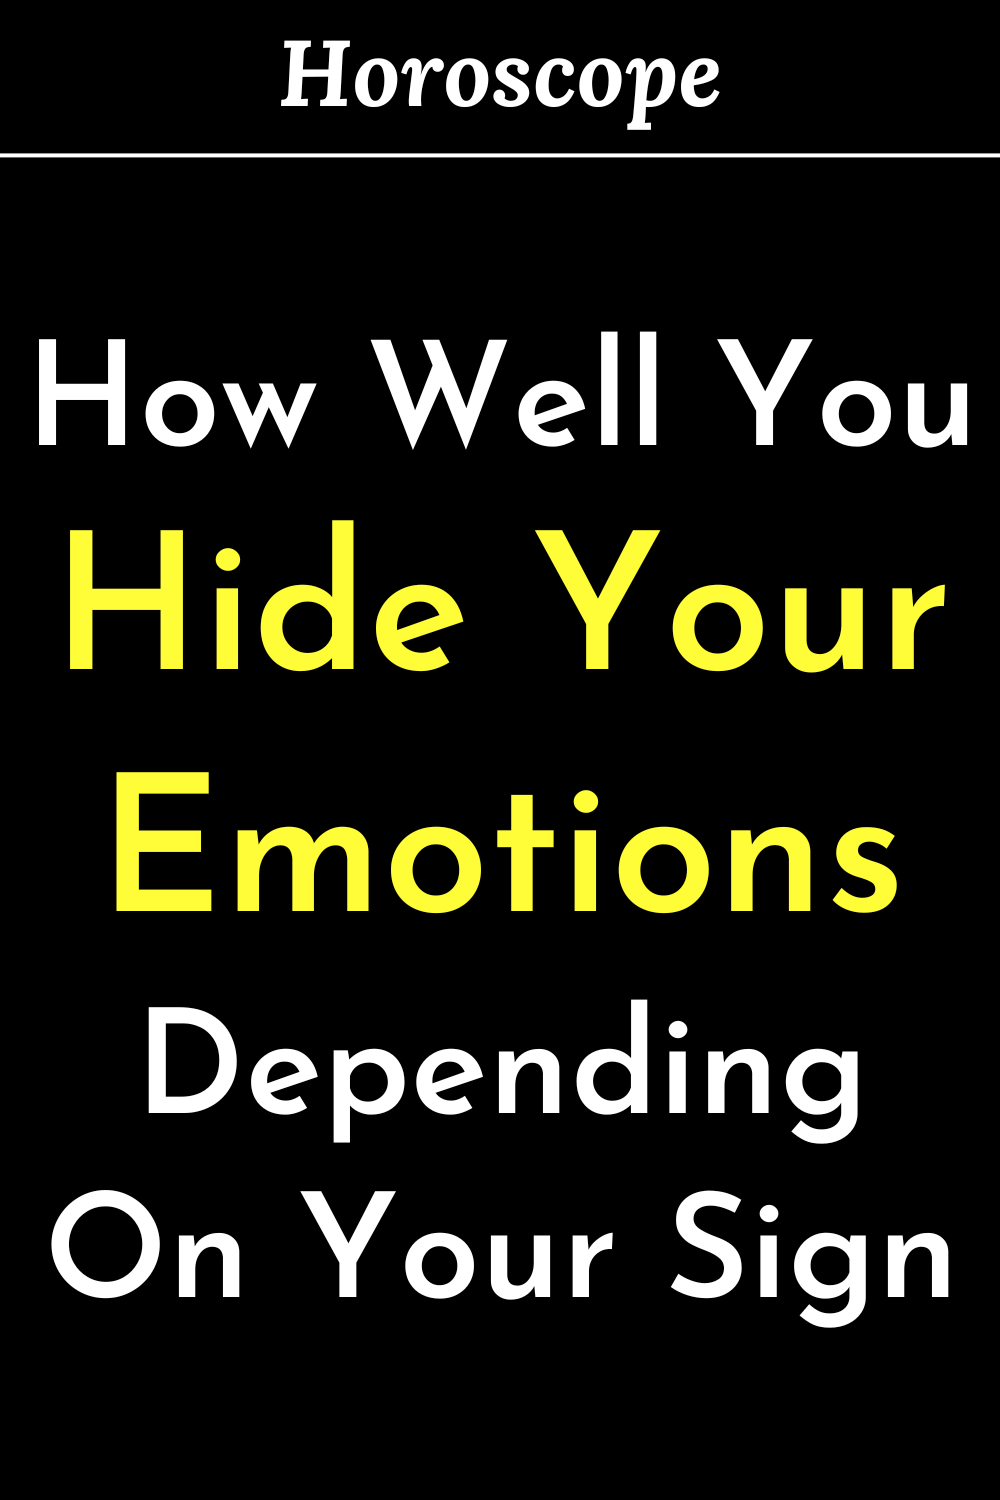 How Well You Hide Your Emotions, Depending On Your Sign